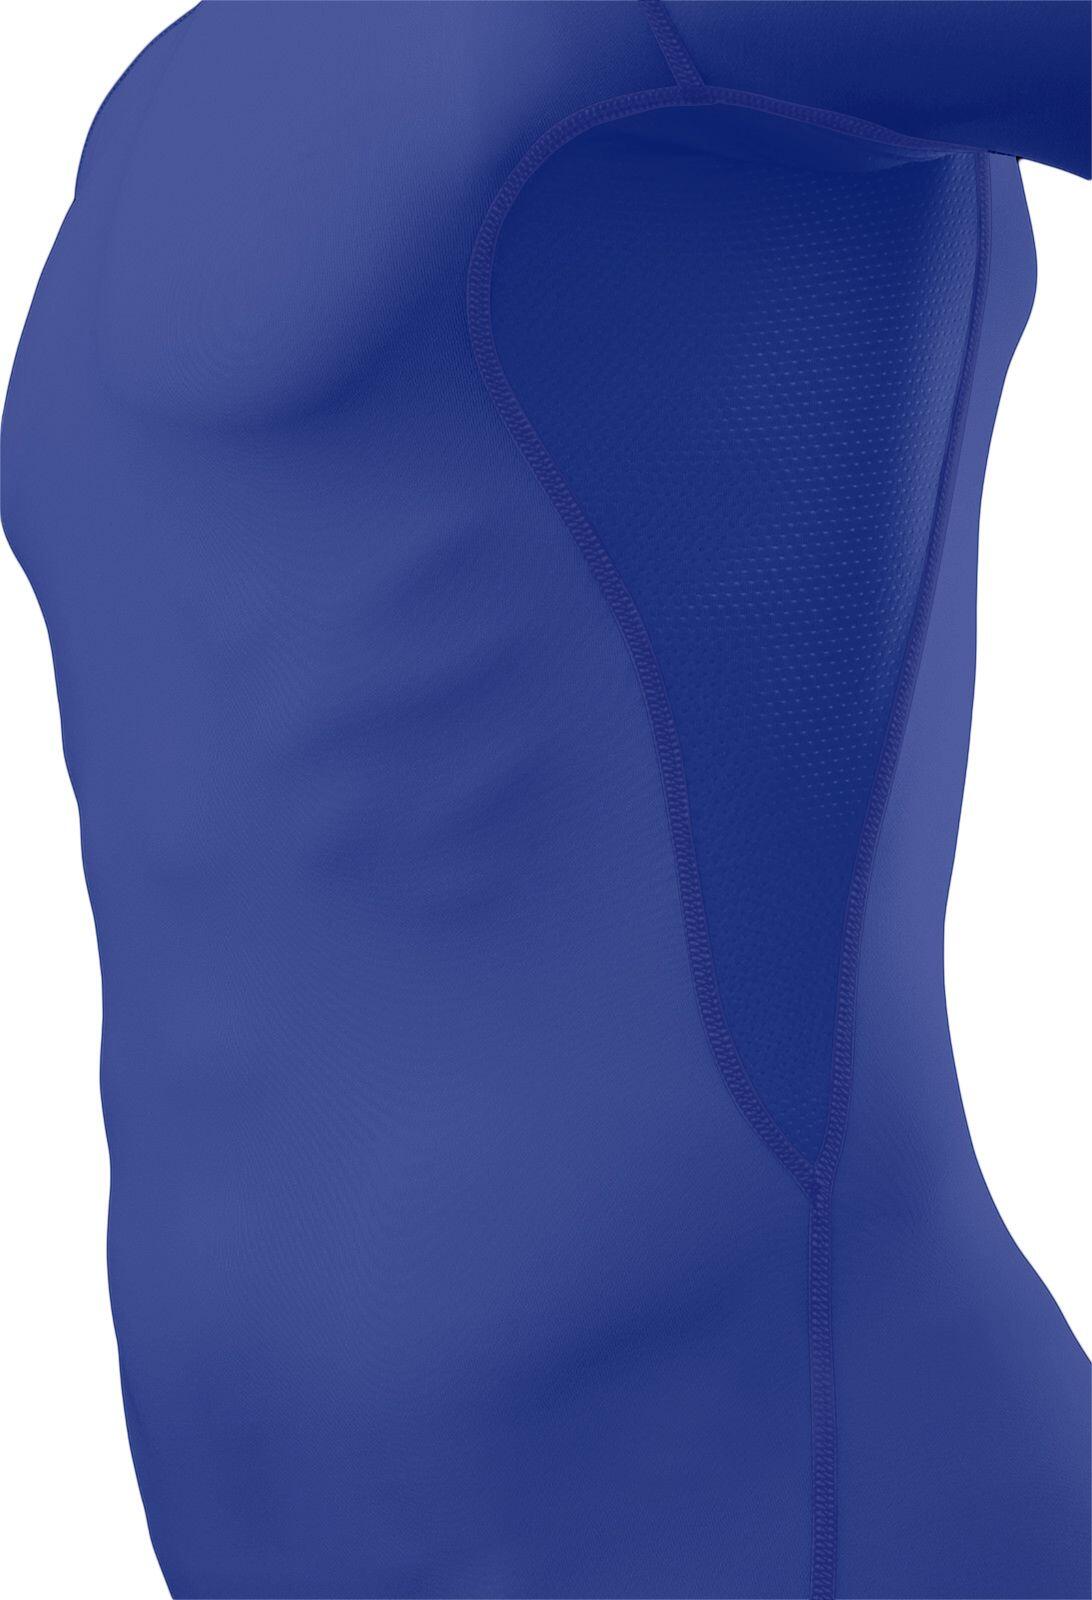 Men's HyperFusion Breathable Base Layer Compression T-shirt - Dazzling Blue 5/5